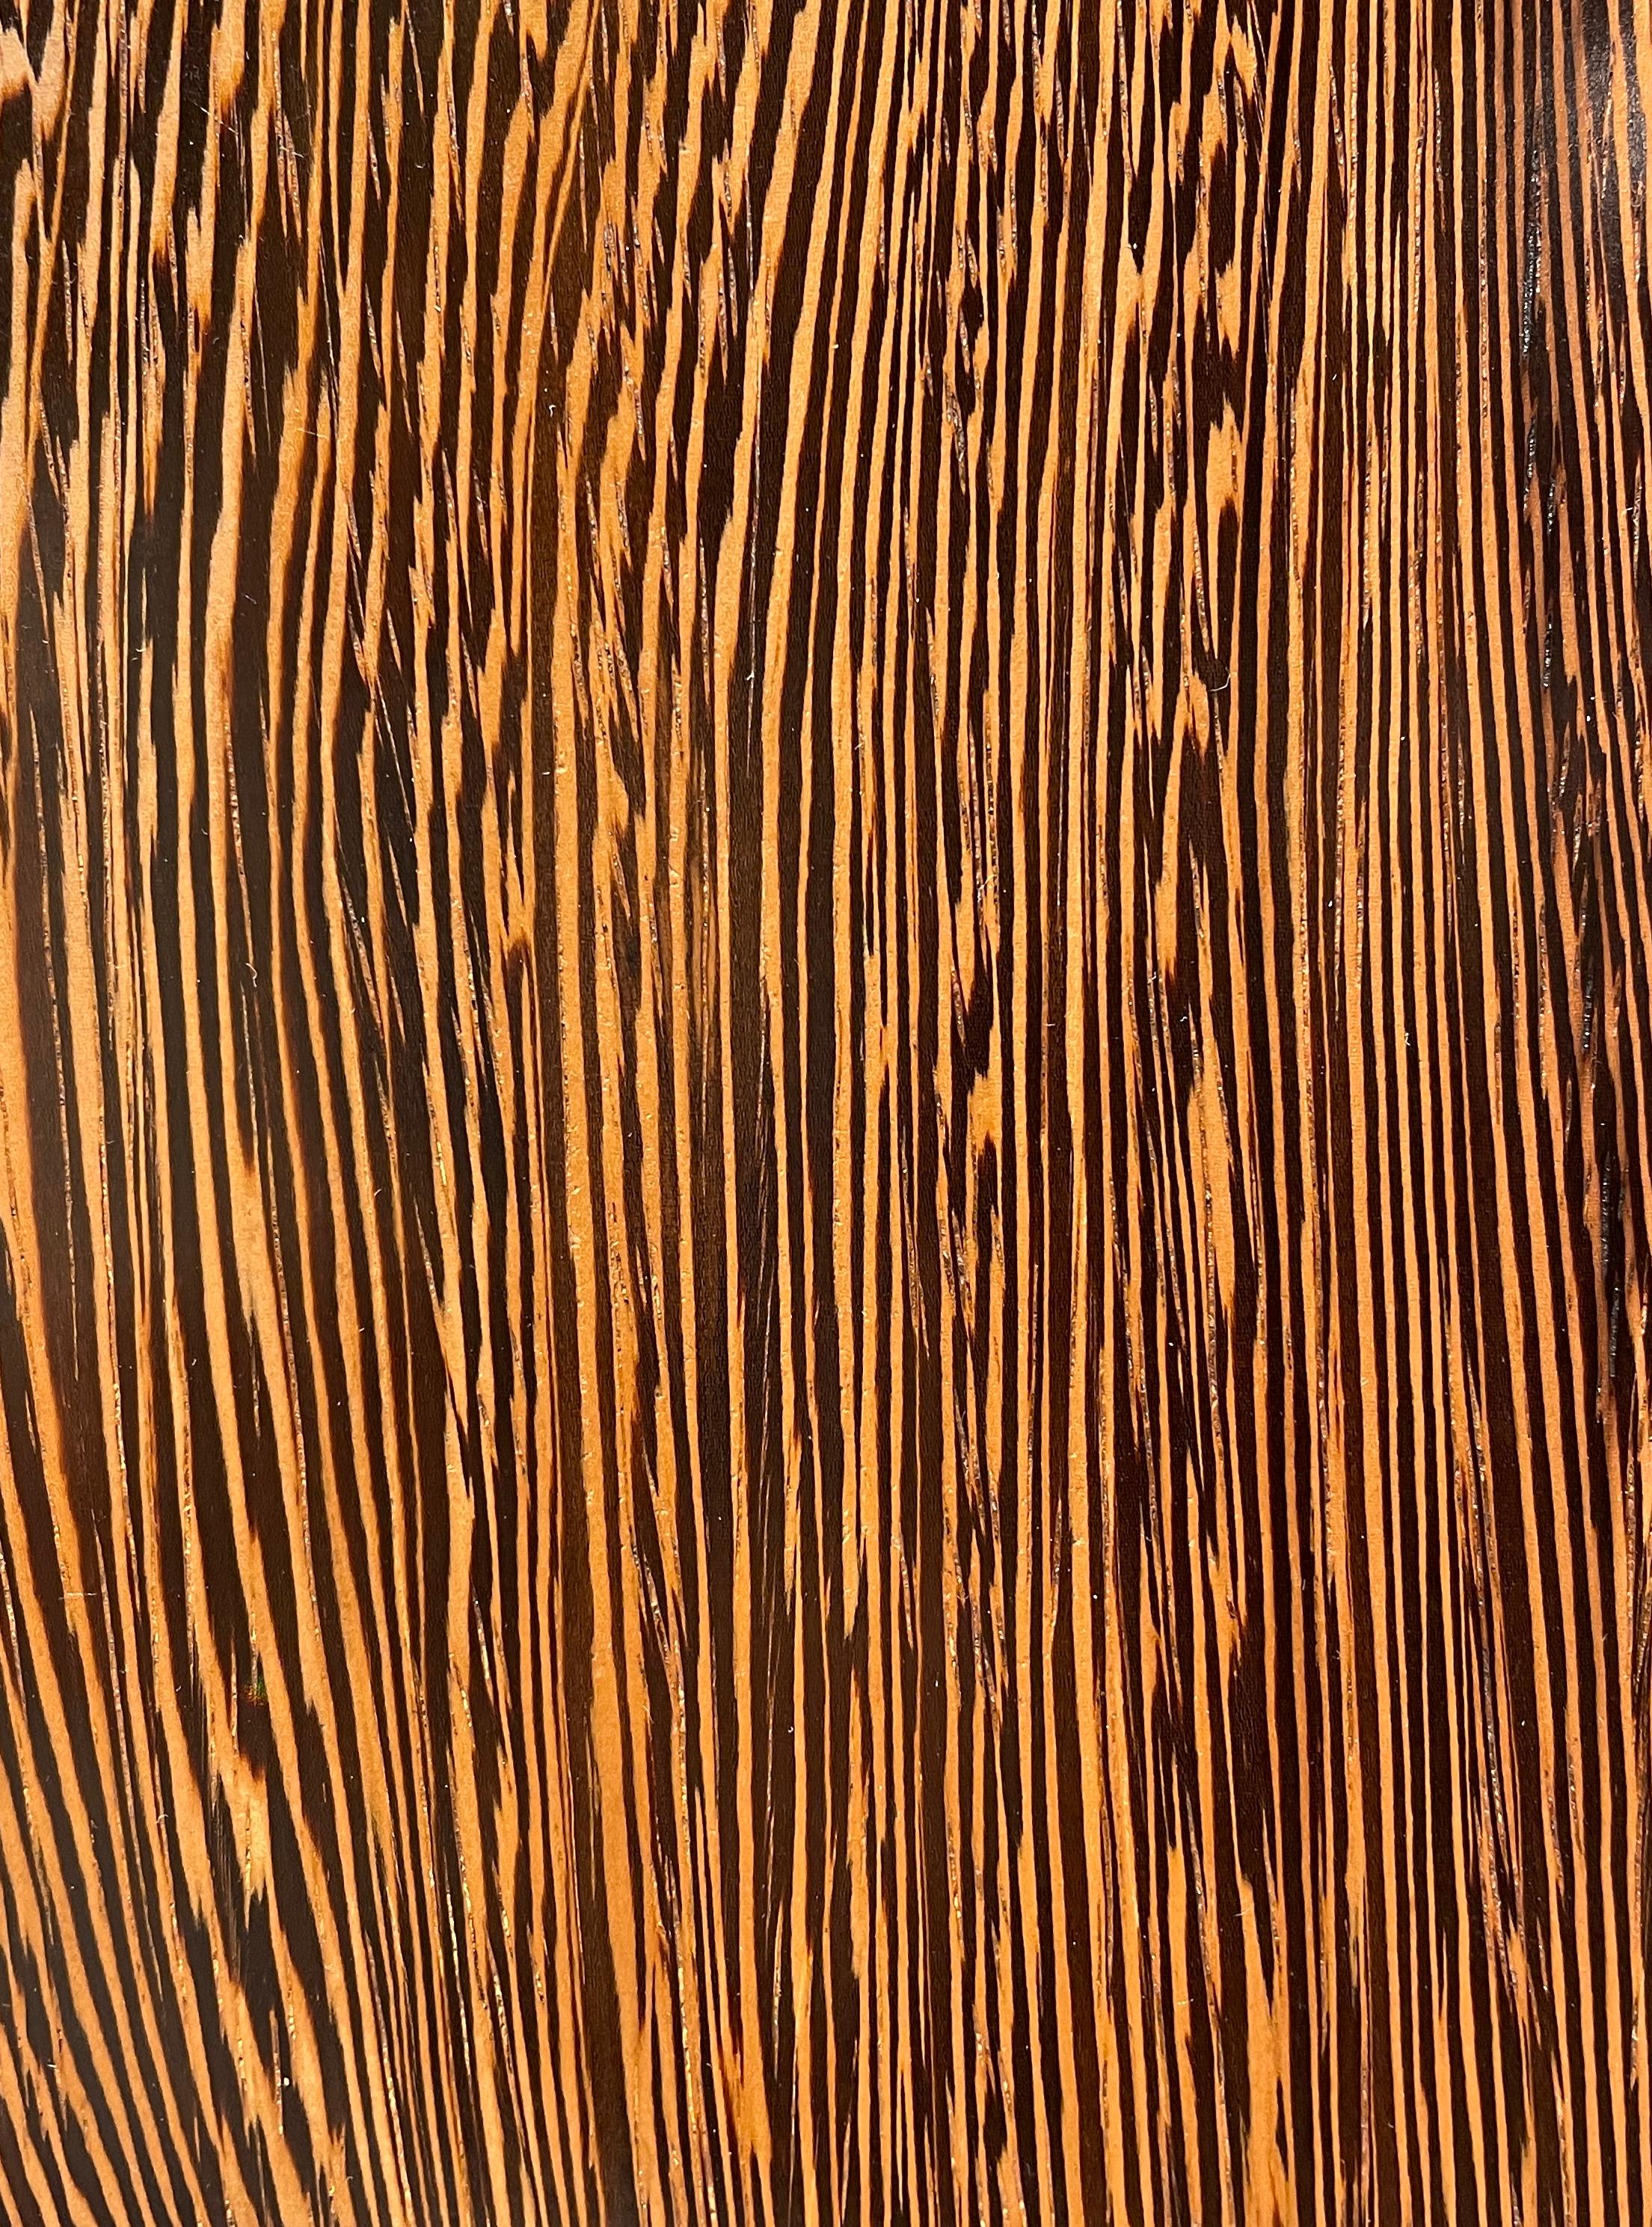 Wenge wood is an incredibly popular African hardwood that has excellent strength and hardness properties, though it is also prized for it's rich dark brown color. Here, Turner has used two semi circles of this beautiful wood to create 